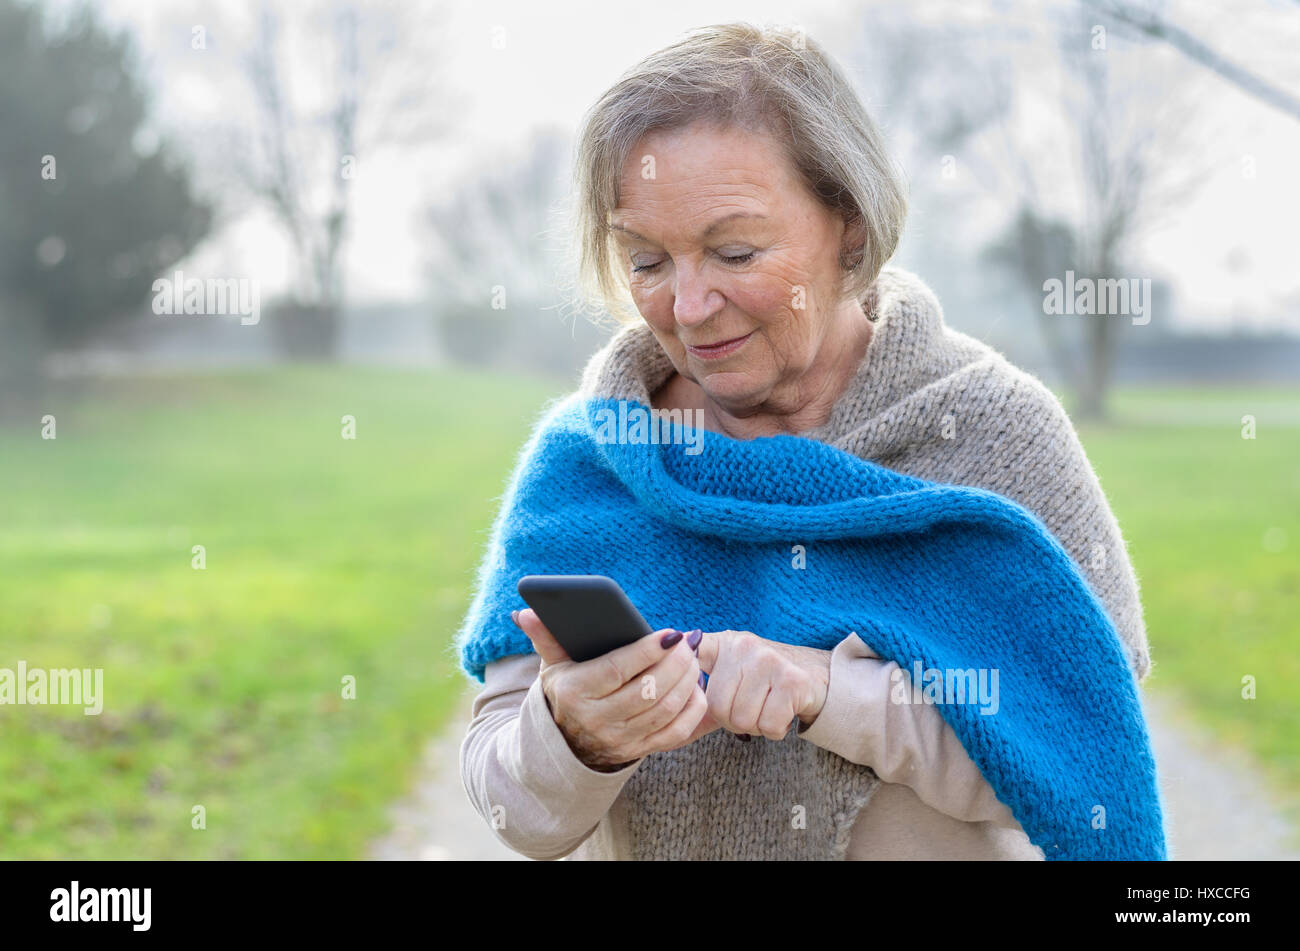 Attractive tech savvy elderly woman using a mobile phone texting a message to a friend or browsing for a number to call, on a rural lane on a misty wi Stock Photo